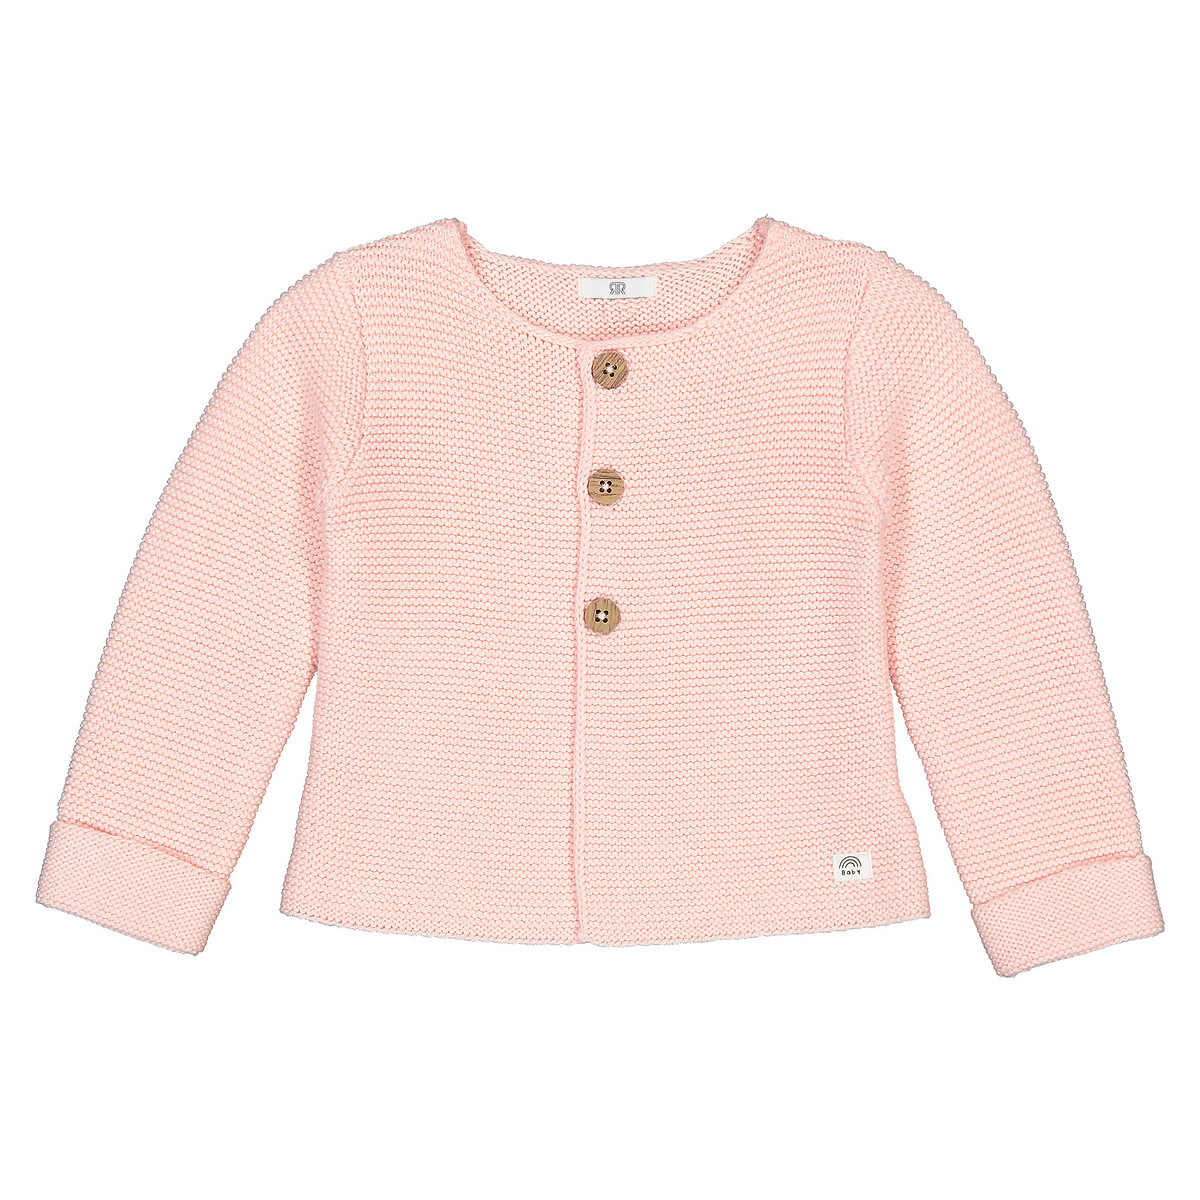 Organic cotton knit cardigan with button fastening, pink, La Redoute ...